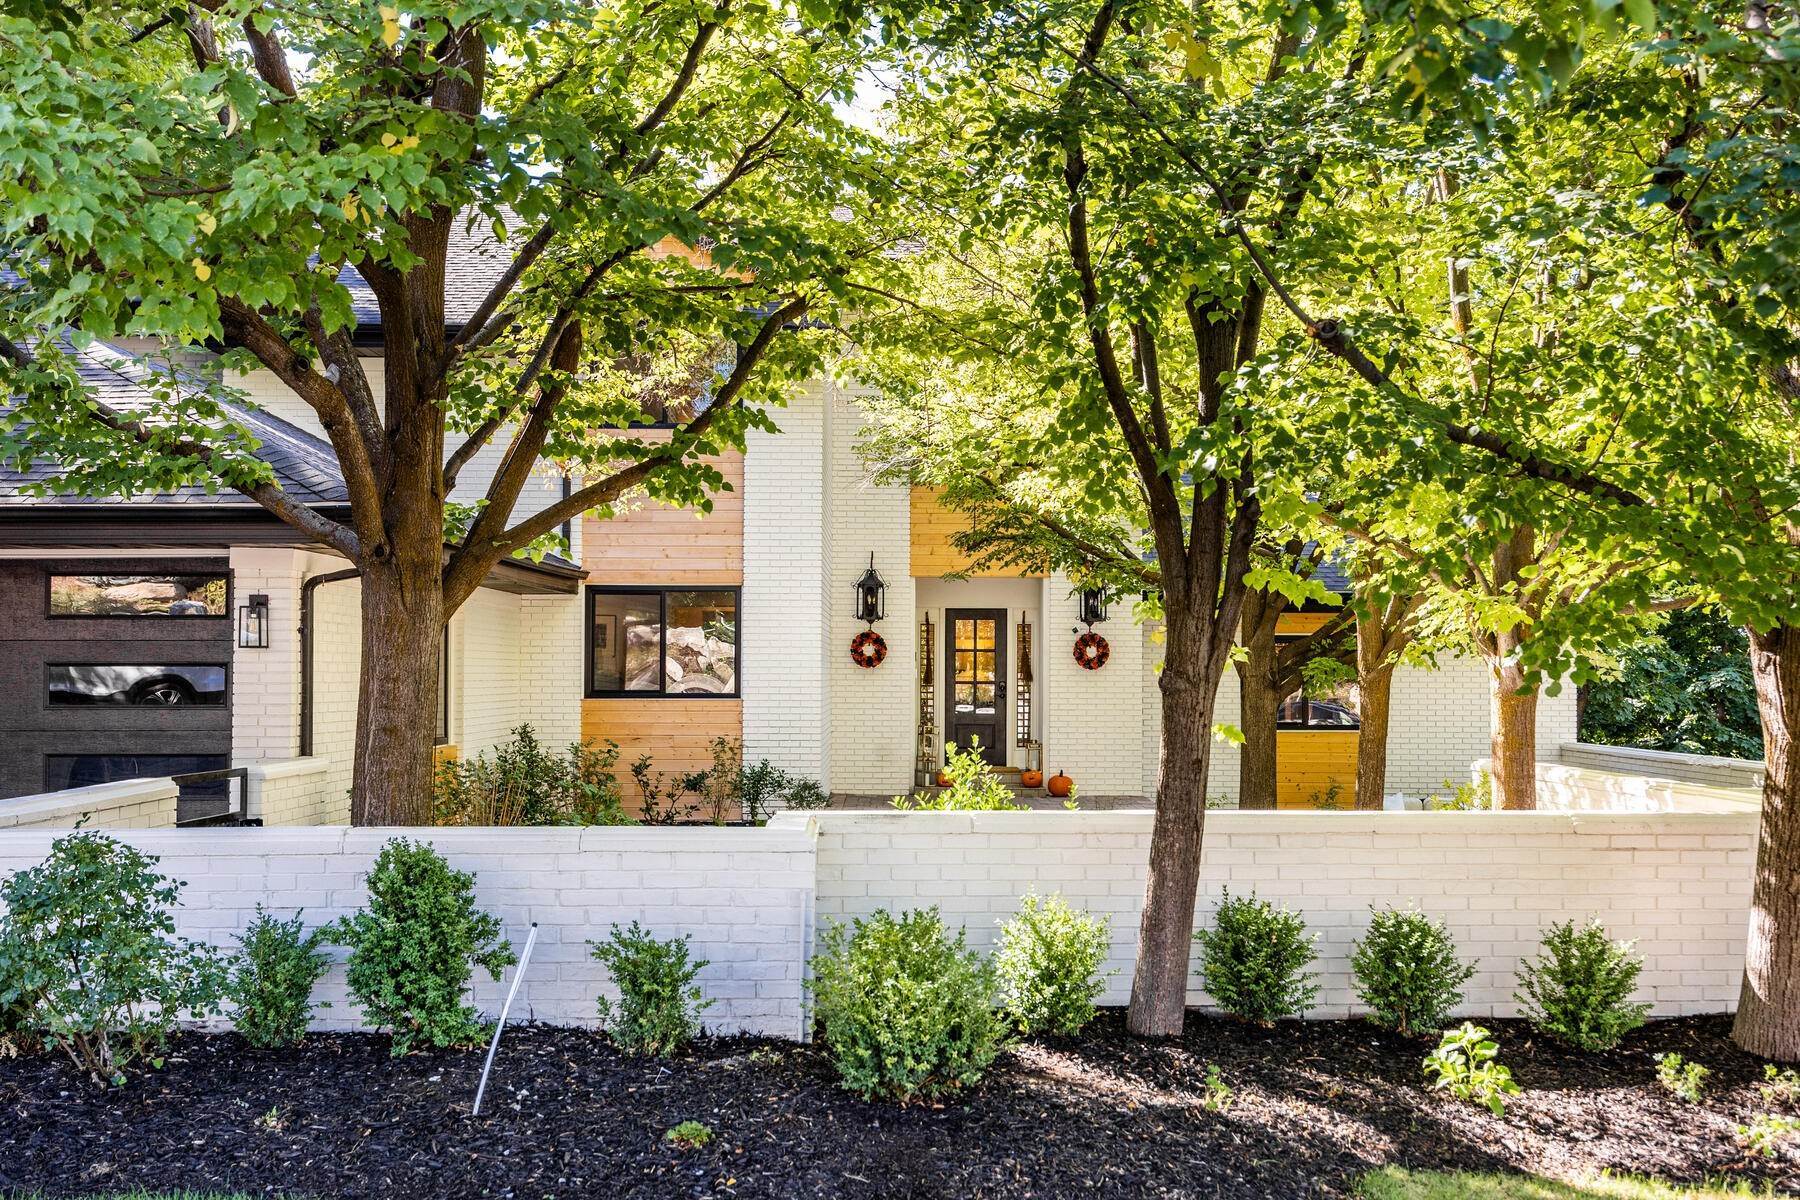 Single Family Homes for Sale at Beautifully Remodeled Federal Heights Symphony of Architecture and Comfort 1556 E Federal Heights Dr Salt Lake City, Utah 84103 United States